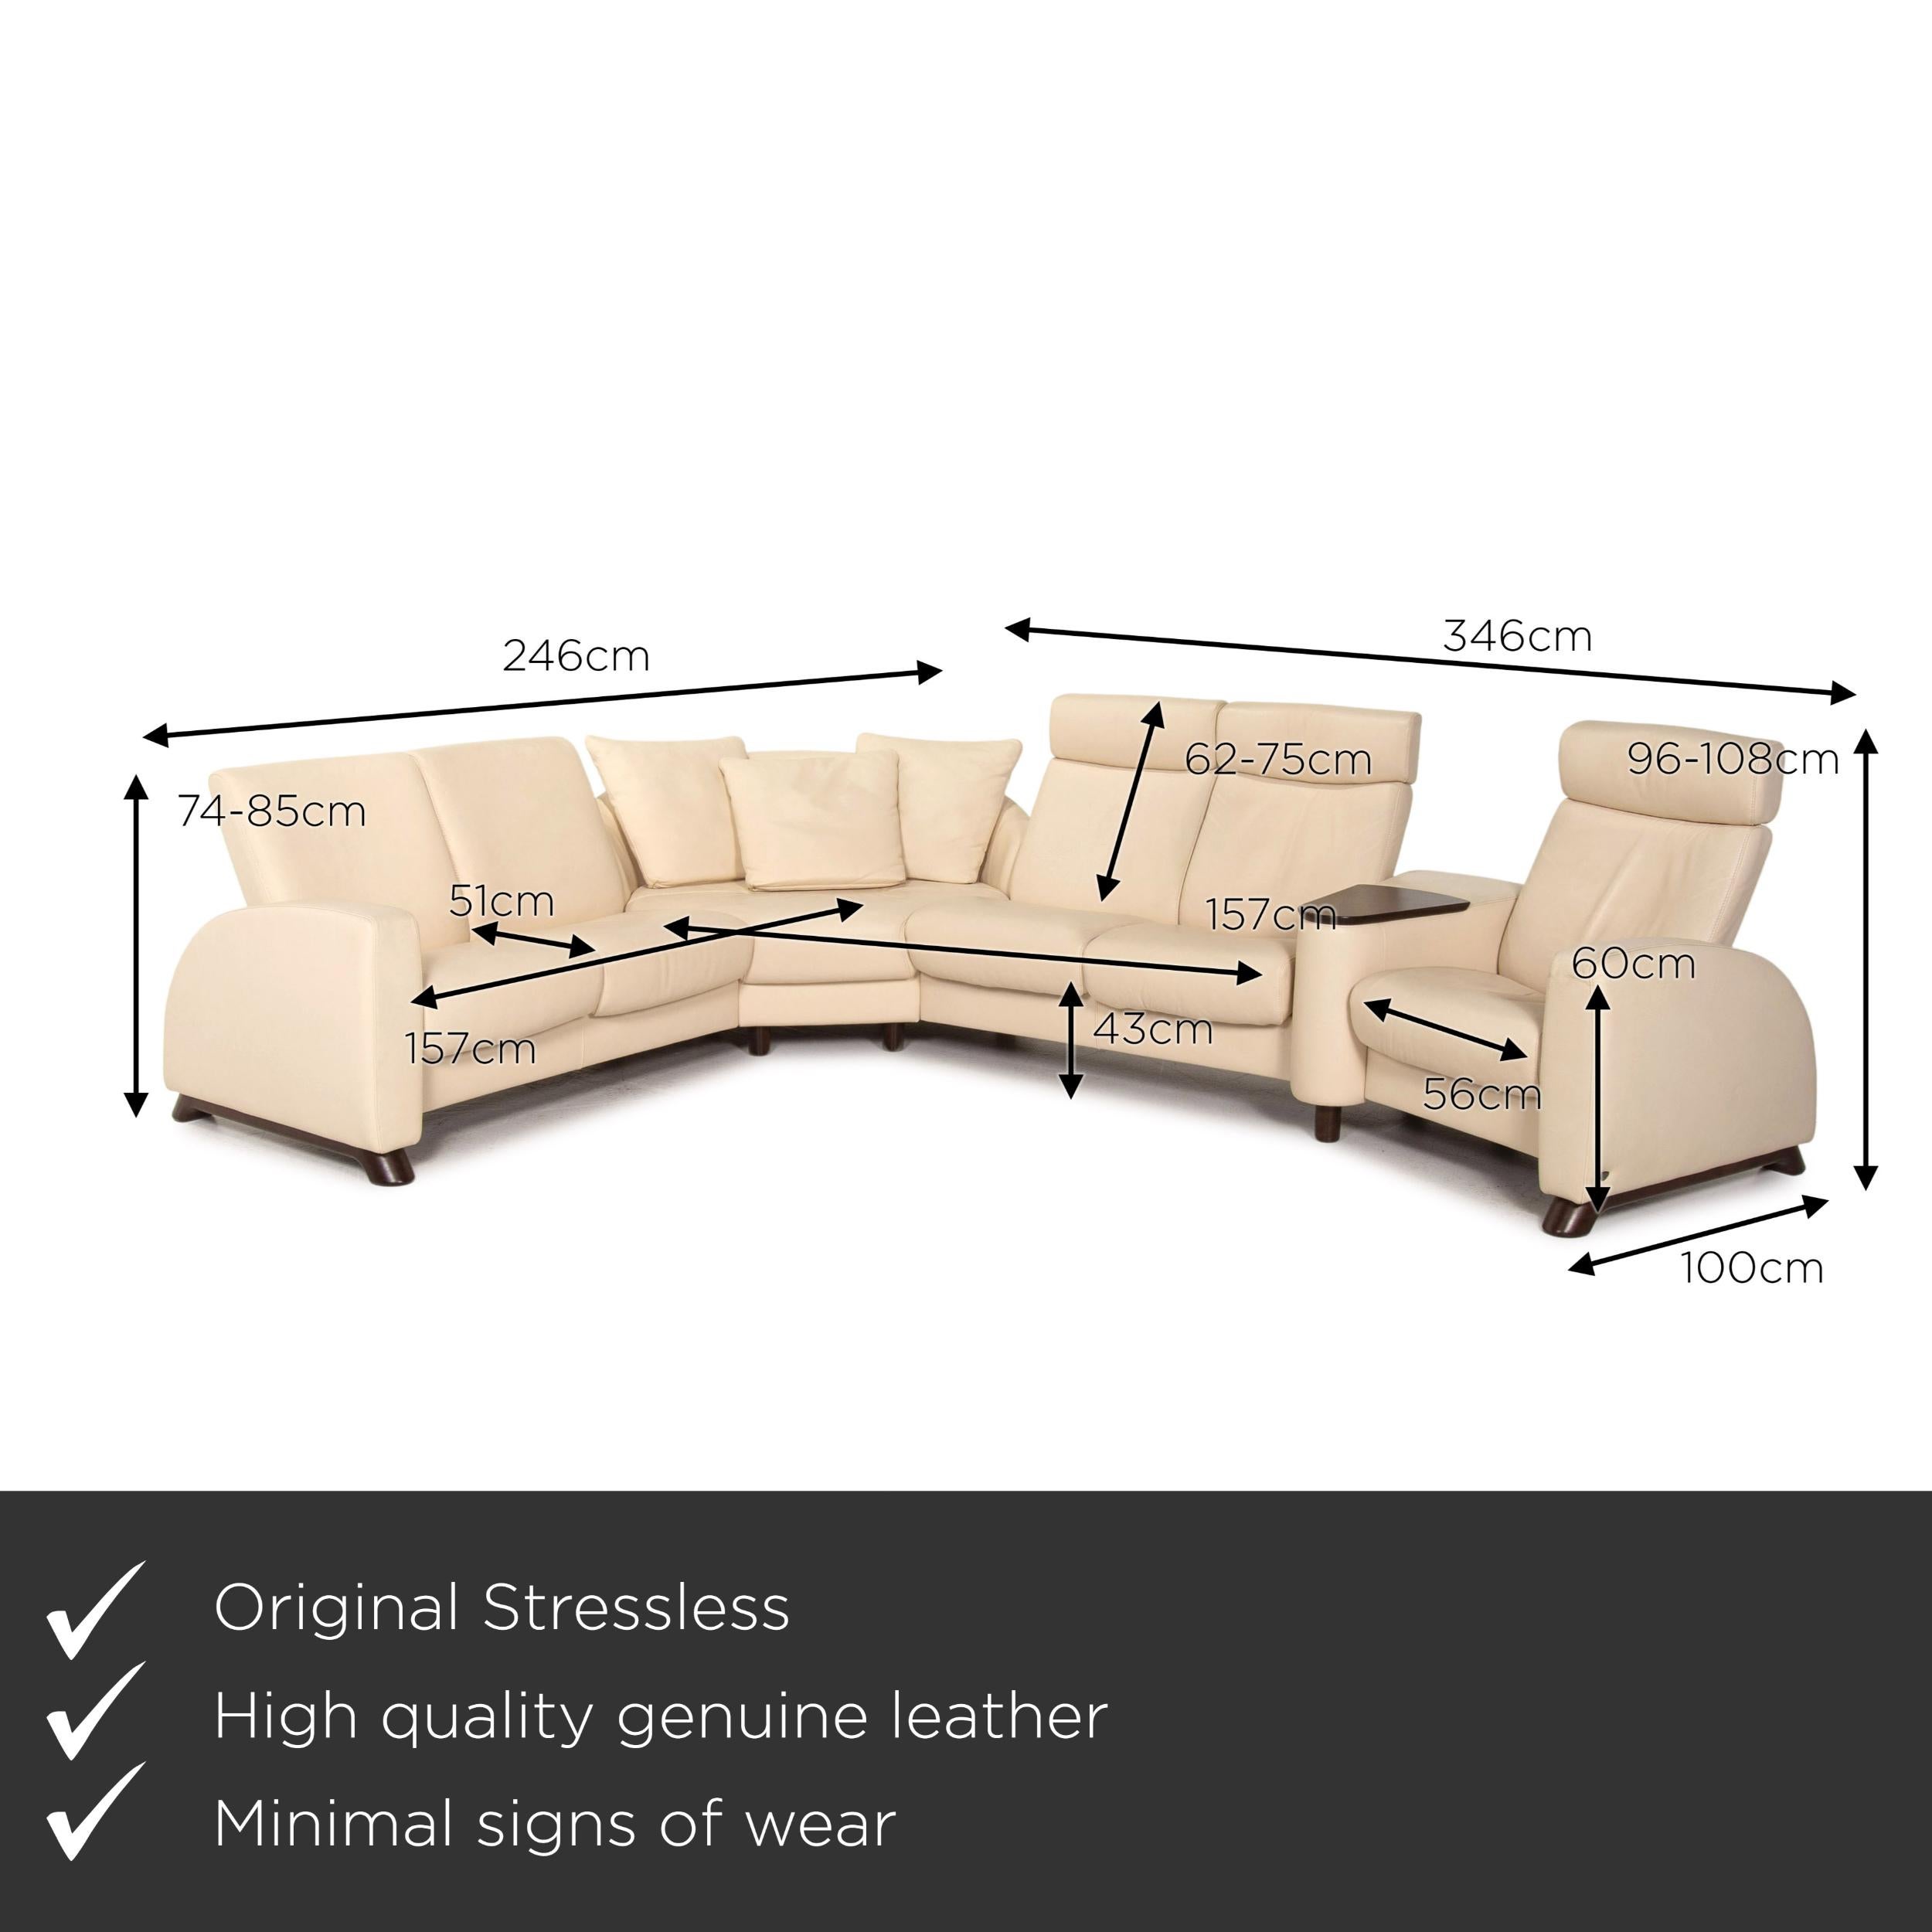 We present to you a Stressless Arion leather corner sofa cream relax function sofa couch.


 Product measurements in centimeters:
 

Depth: 100
Width: 246
Height: 85
Seat height: 43
Rest height: 60
Seat depth: 51
Seat width: 157
Back